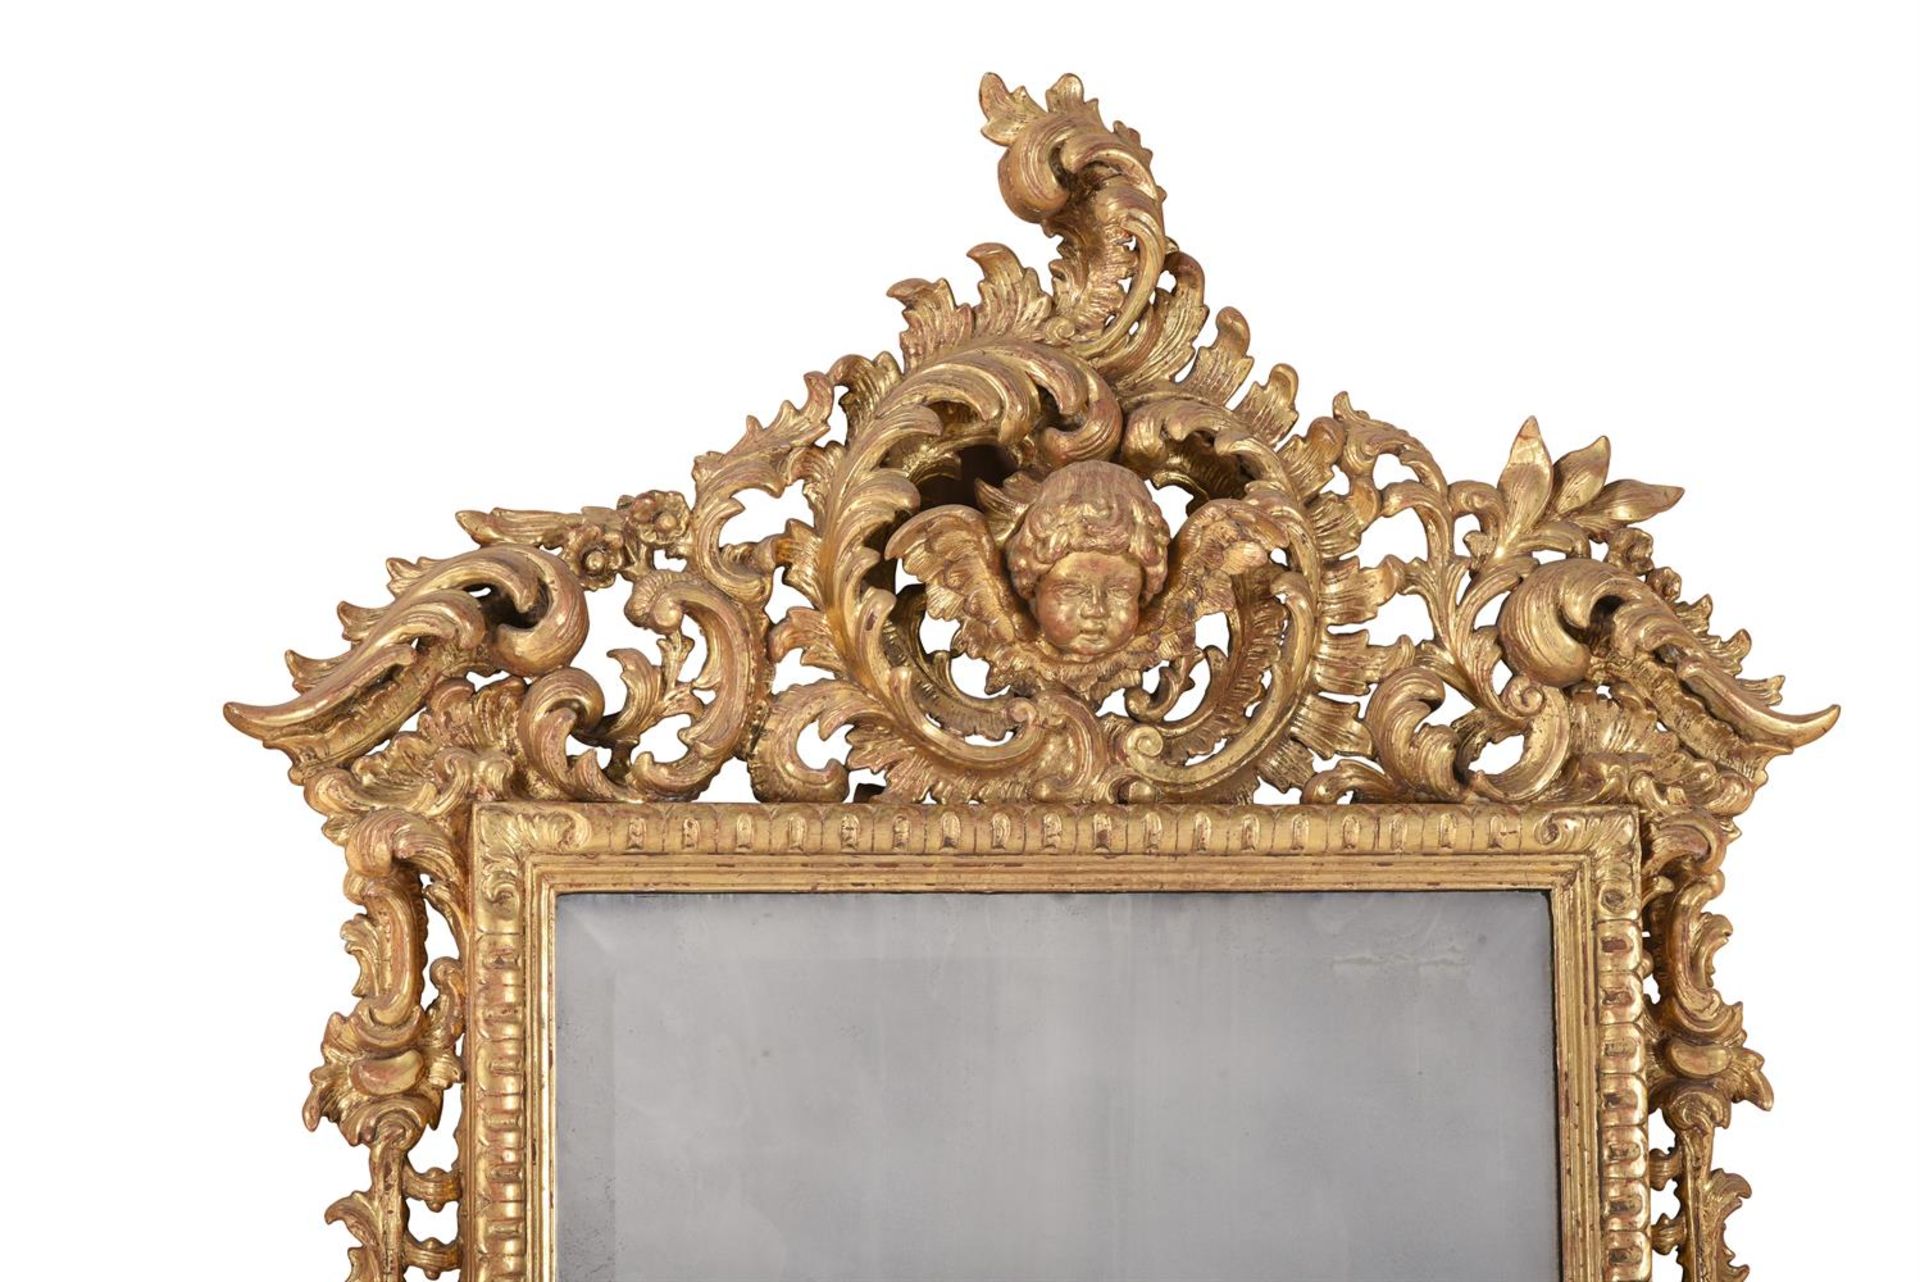 A CONTINENTAL CARVED GILTWOOD MIRROR, POSSIBLY ITALIAN, 19TH CENTURY - Image 2 of 4